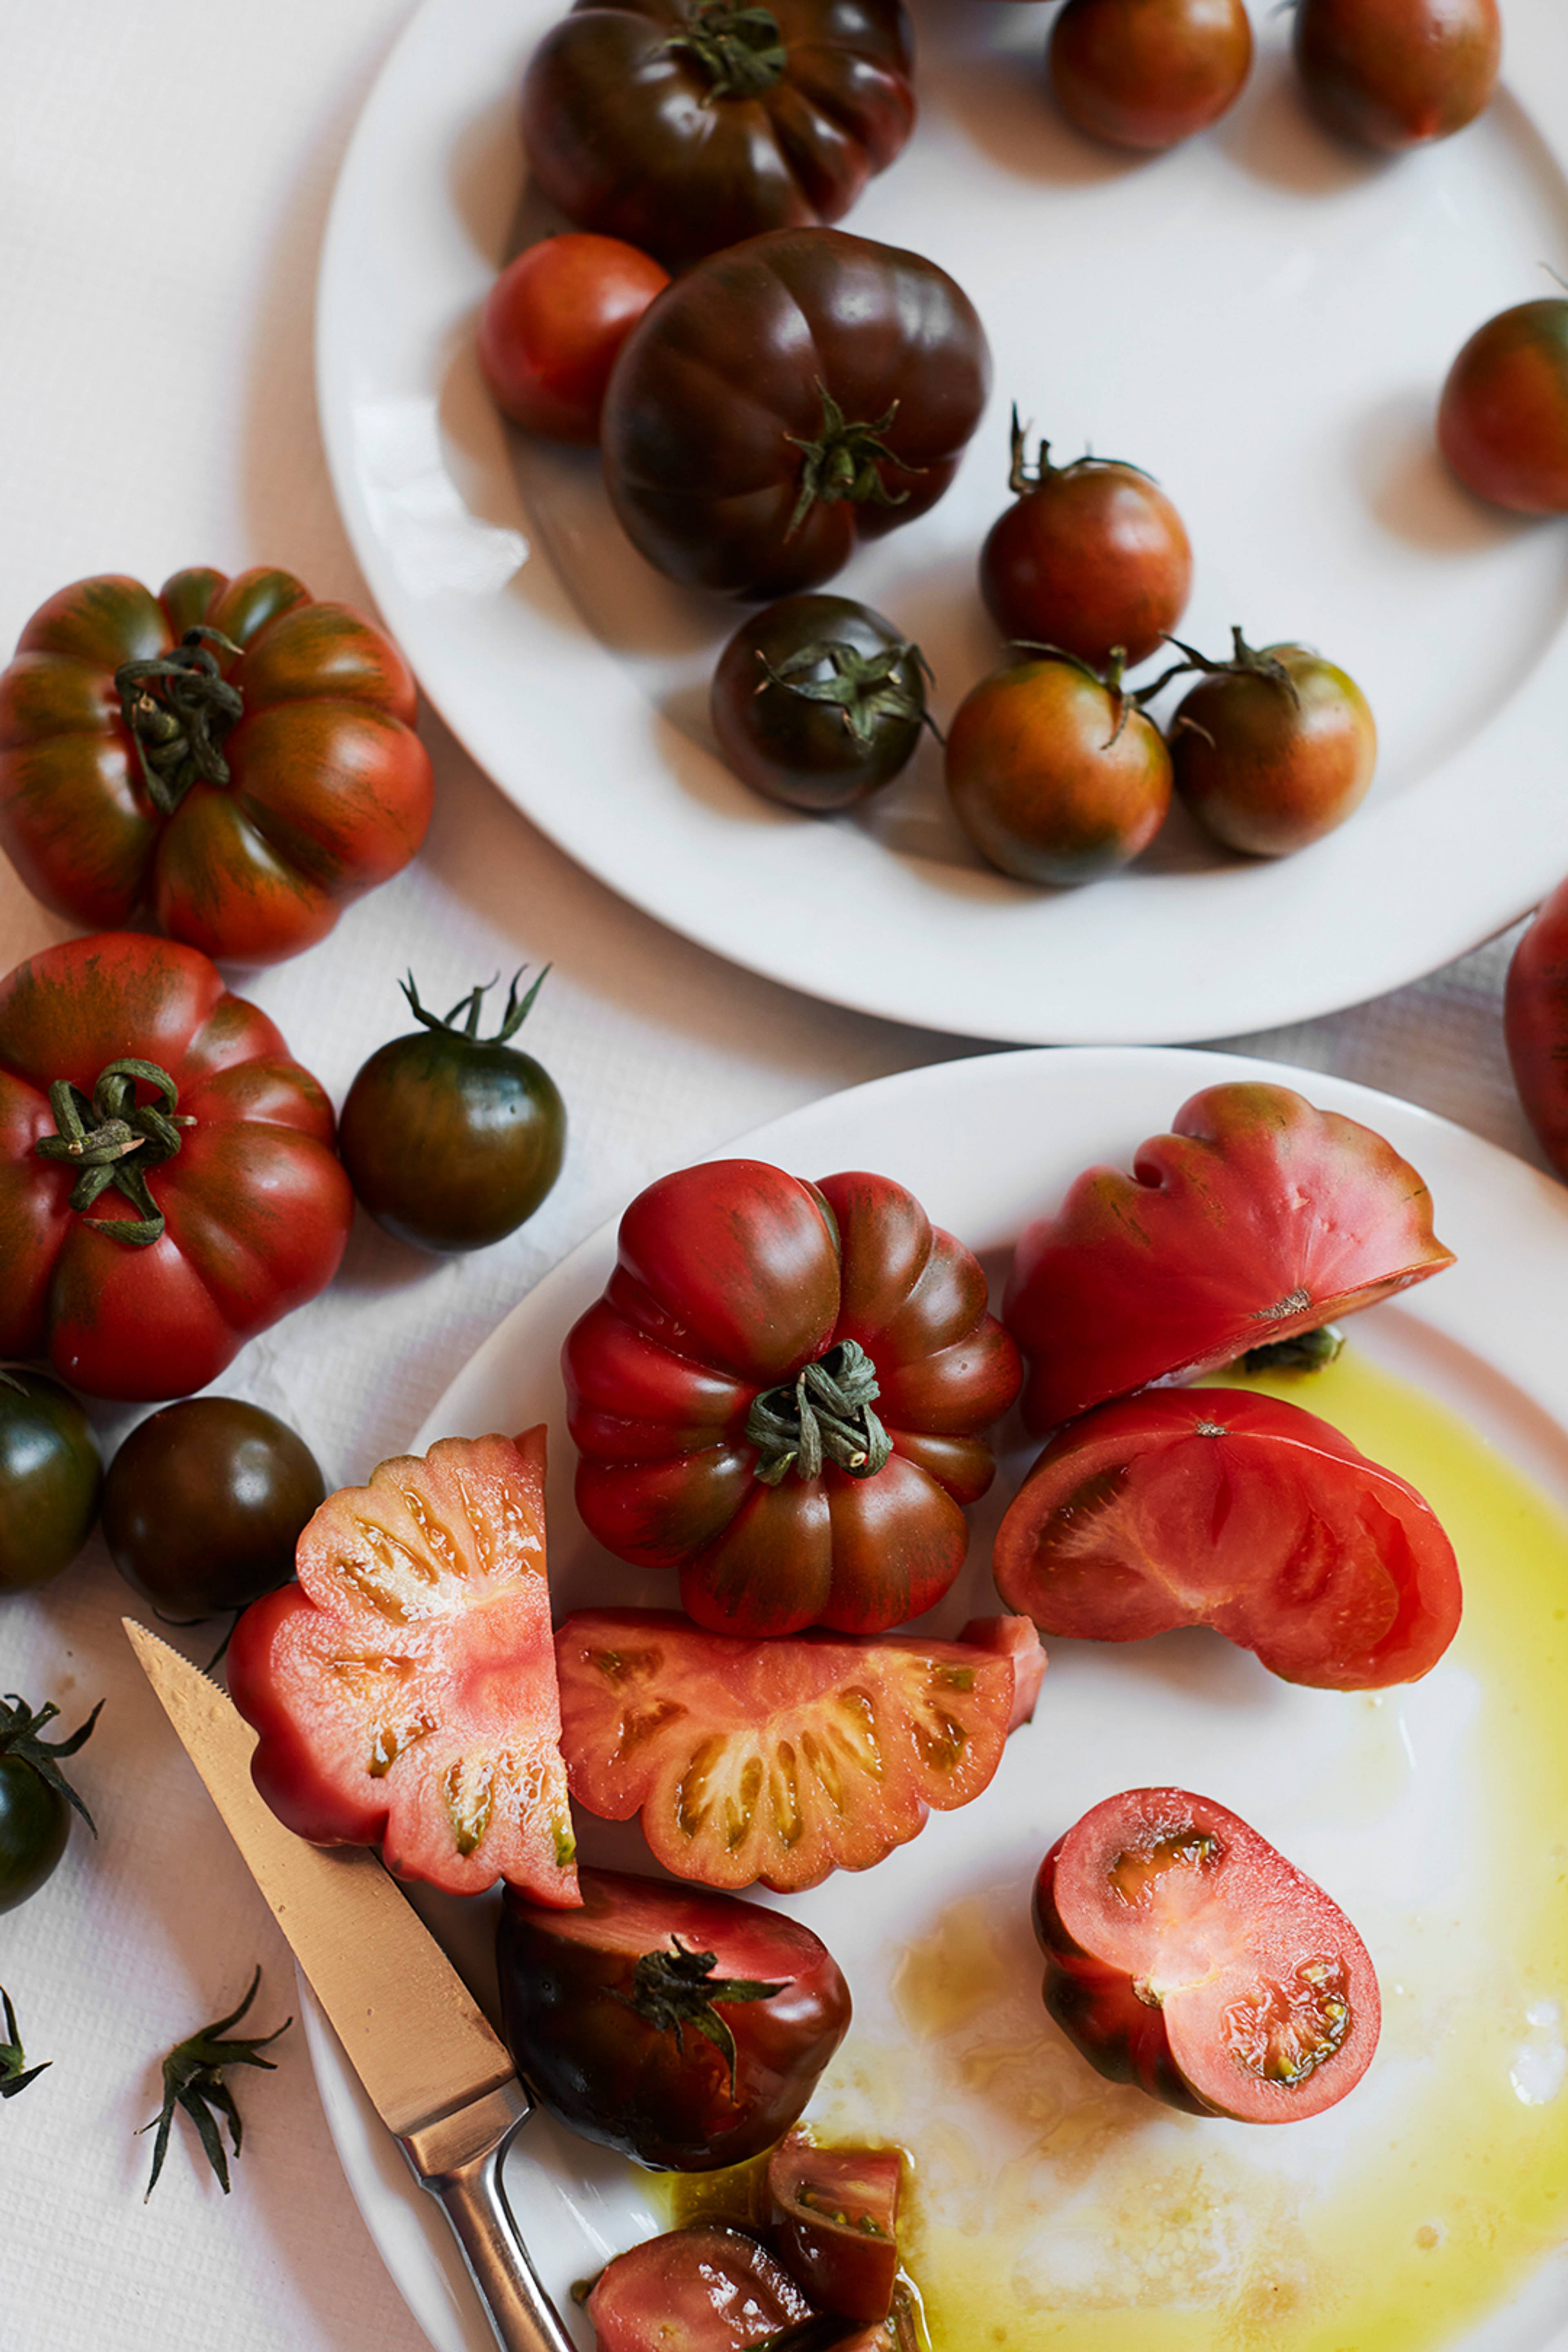 tomatoes of different shapes and sizes cut open on a plate